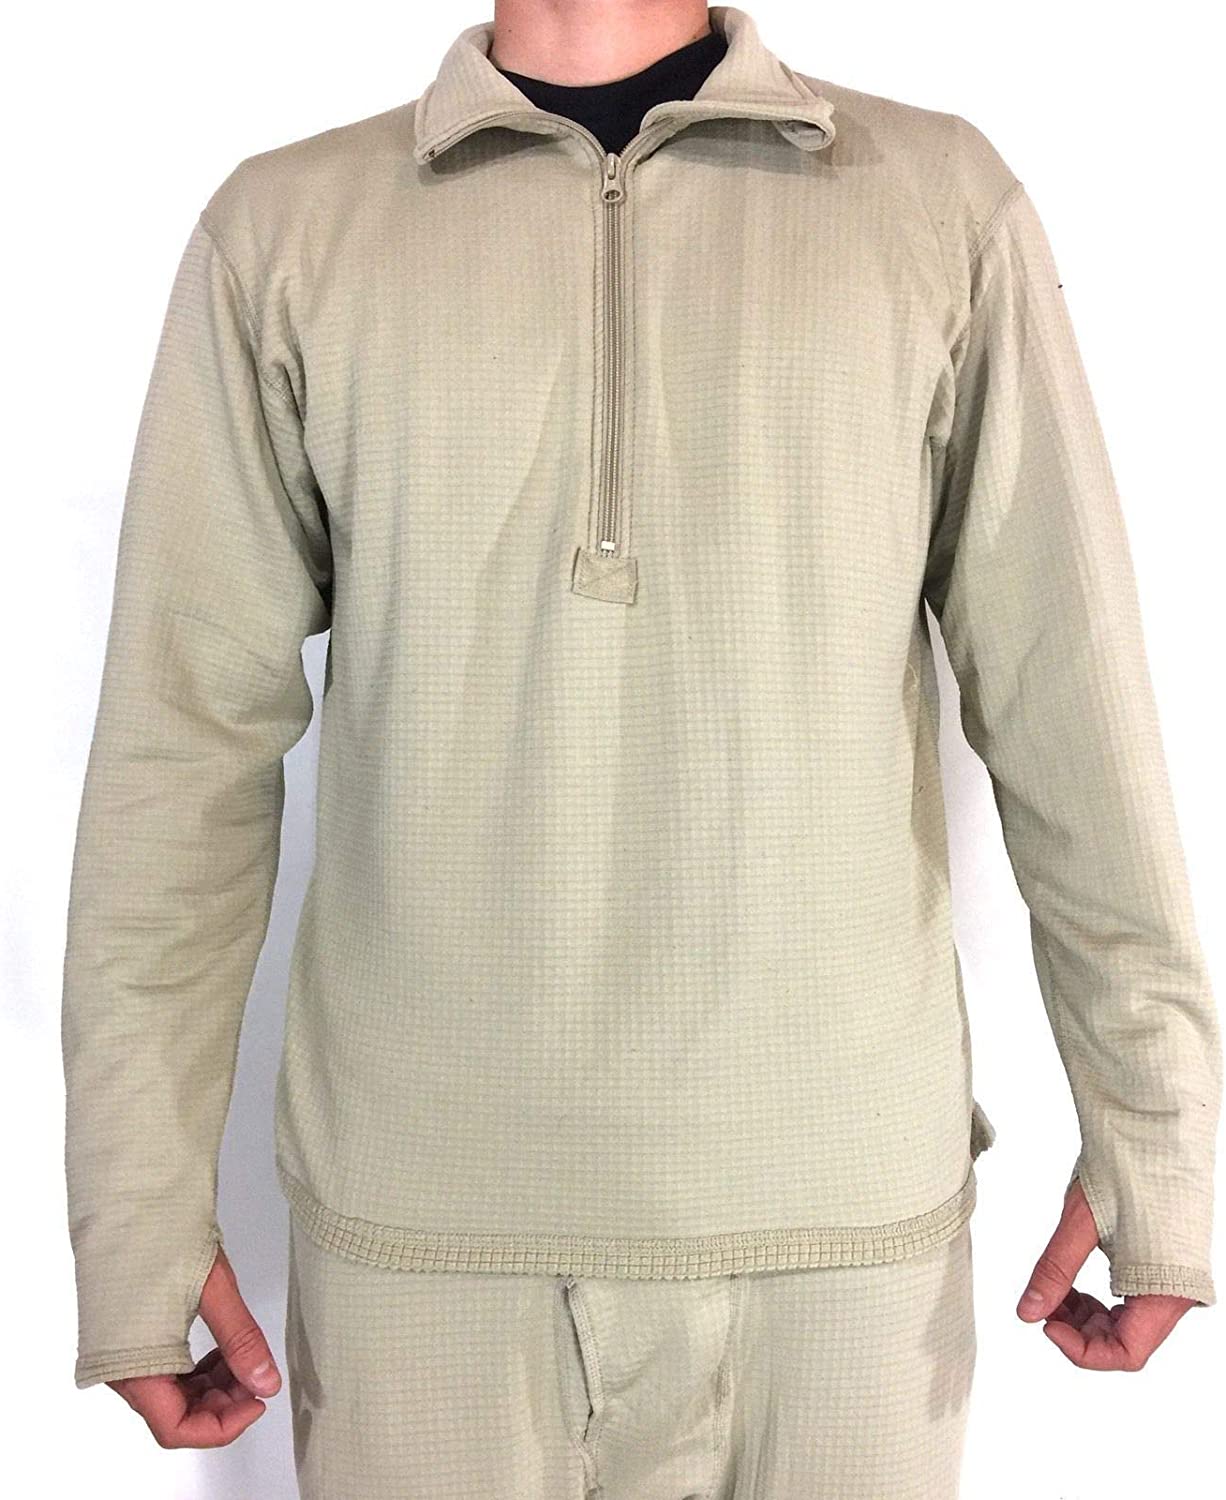 USED Polartec Waffle Thermals